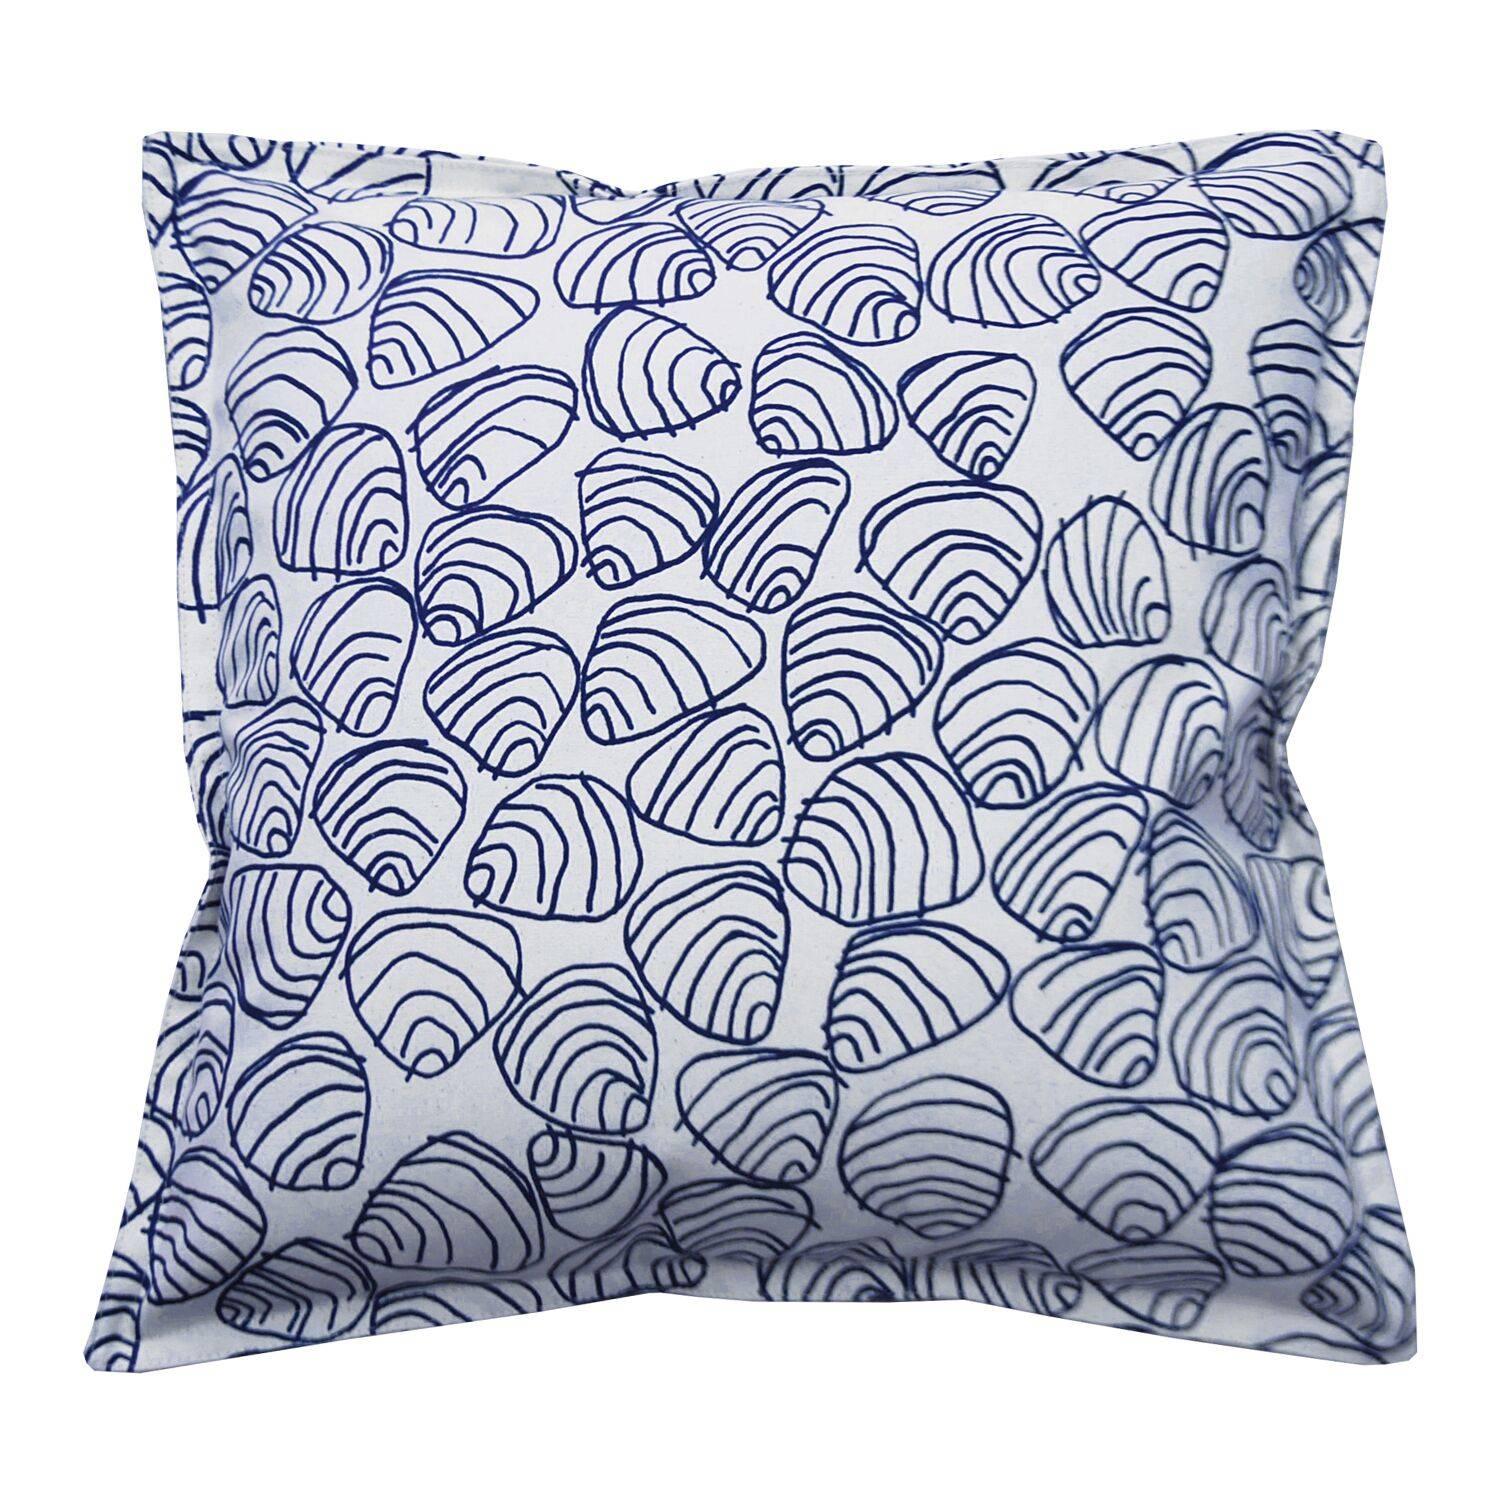 Navy Shells on Cotton Canvas Pillow For Sale